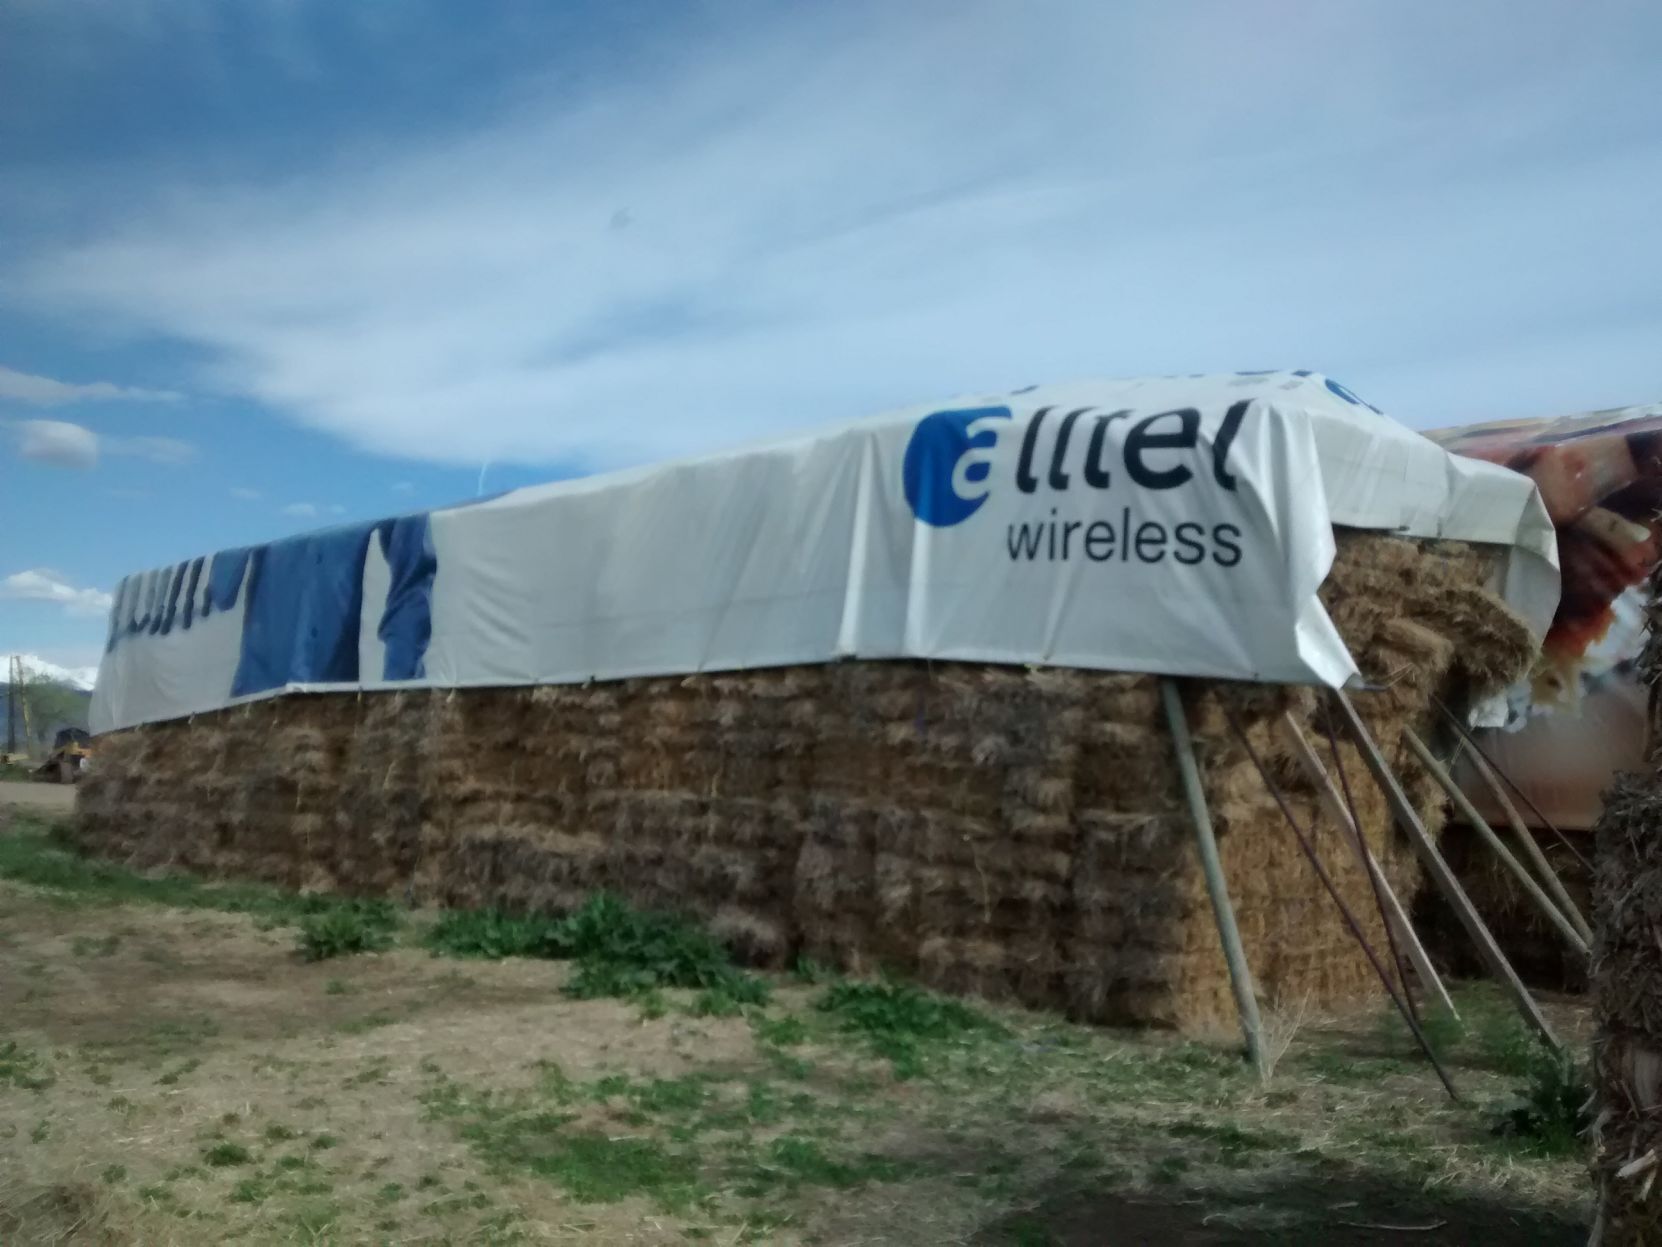 Examples of materials for which alternate uses have been found includes this billboard being used as a tarp, according to this photo from Repurposed Materials.  PHOTO CREDIT: Contributed